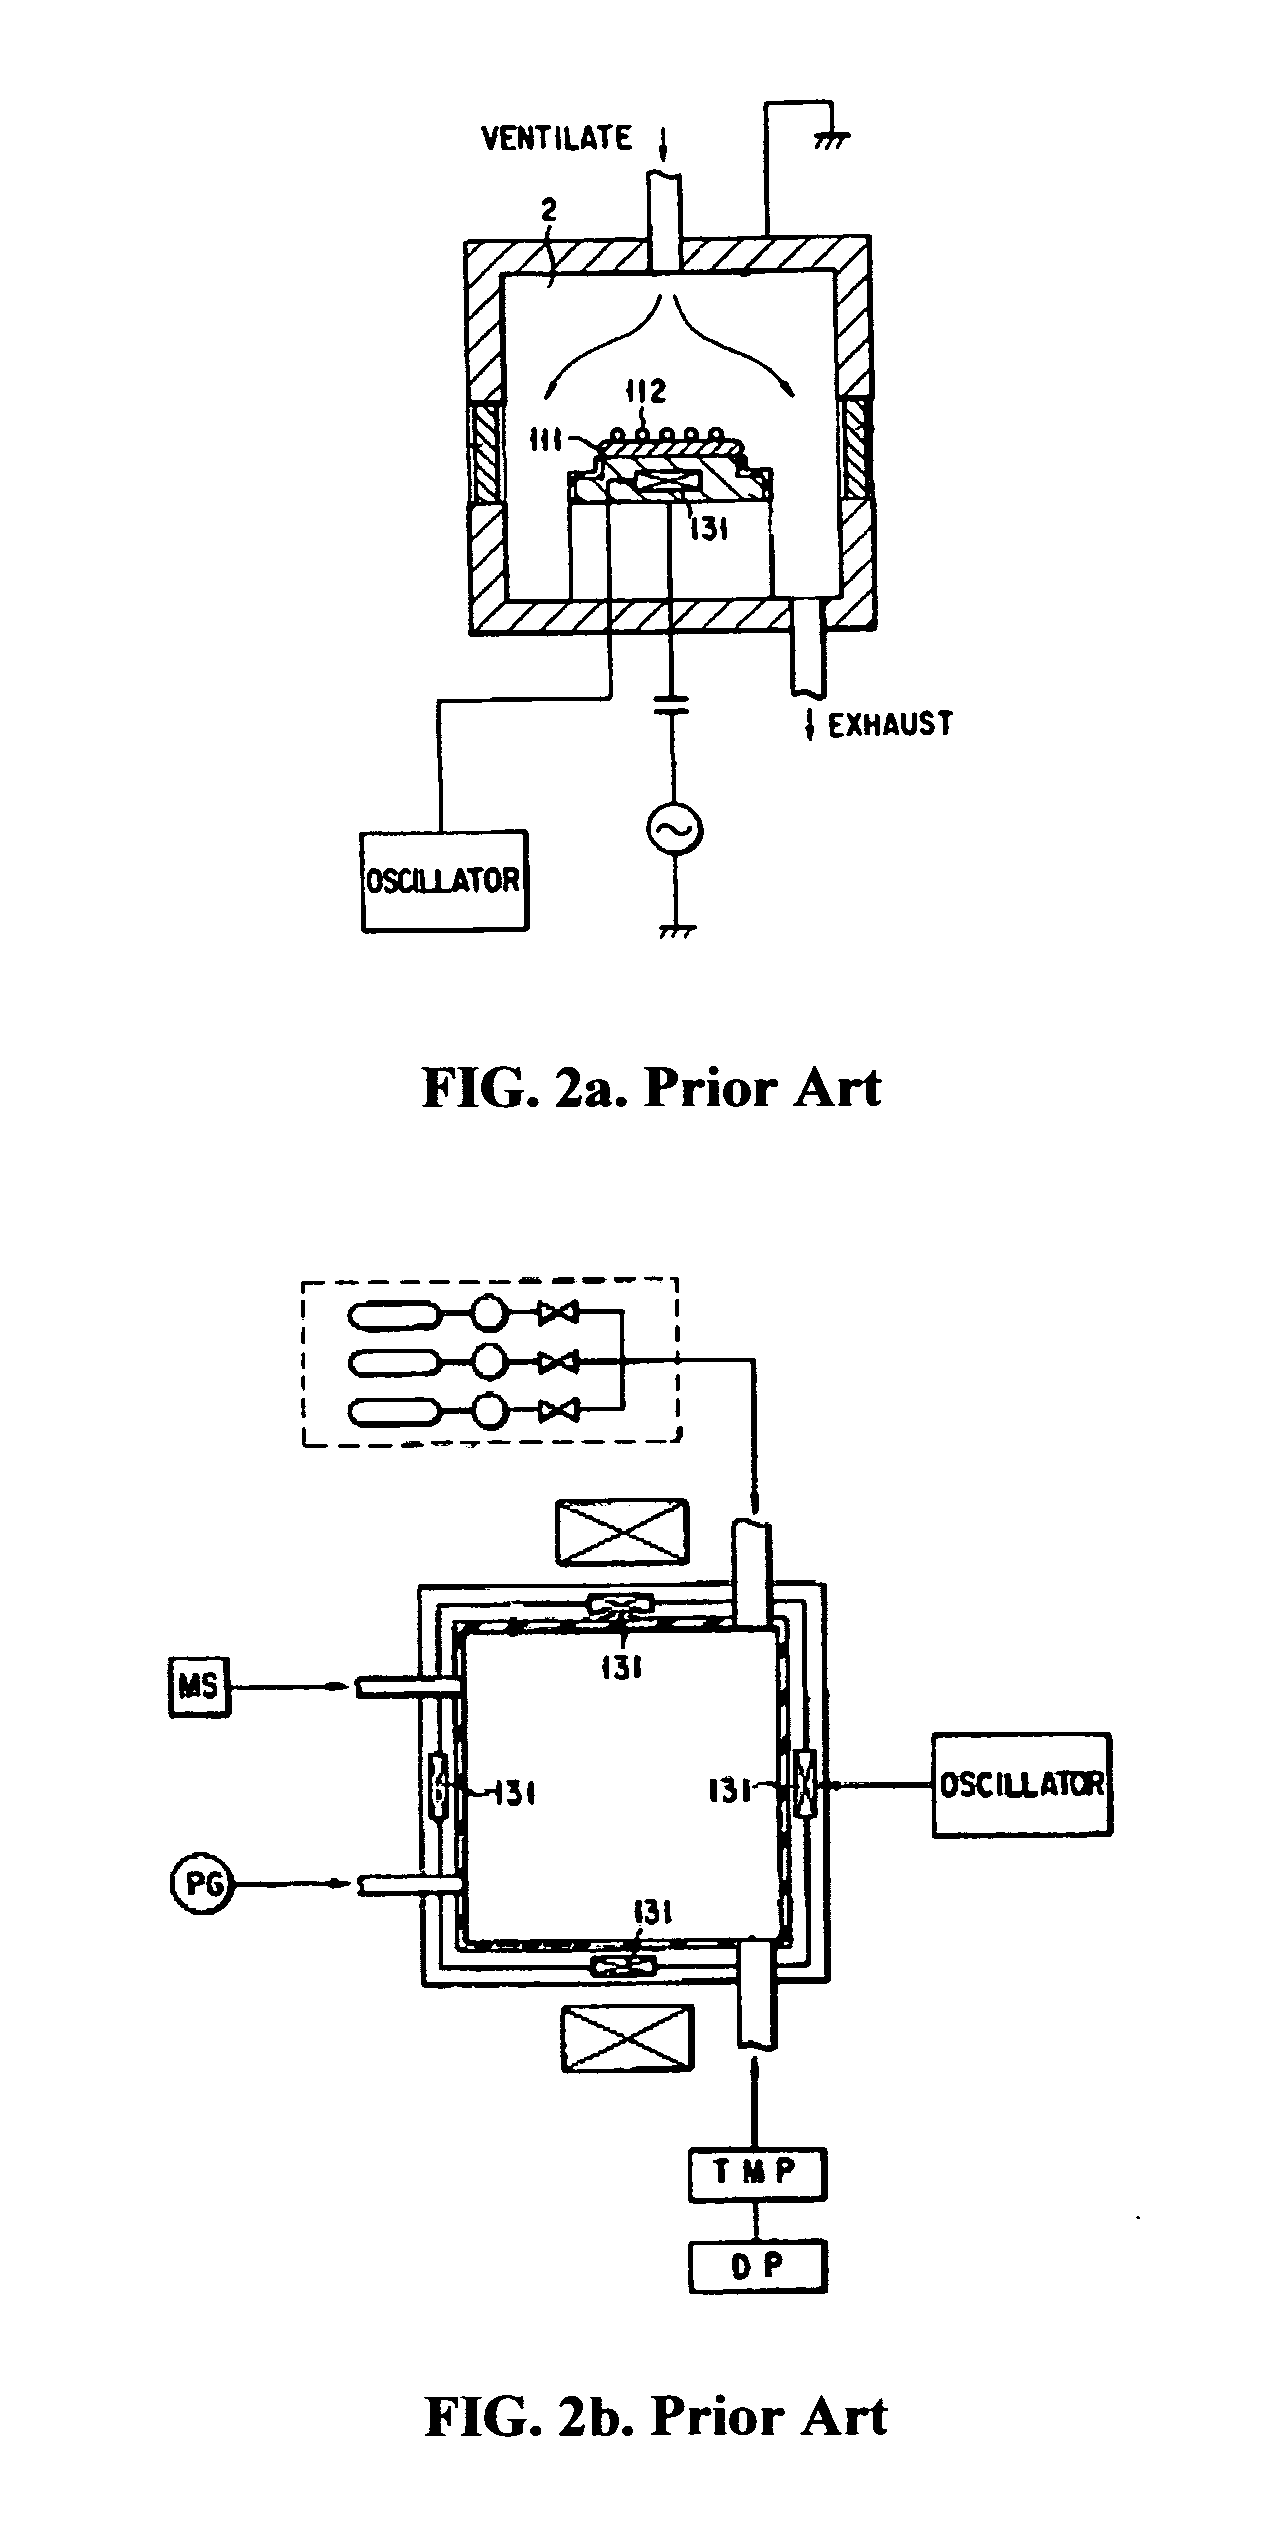 Apparatus and method for enhancing plasma etch